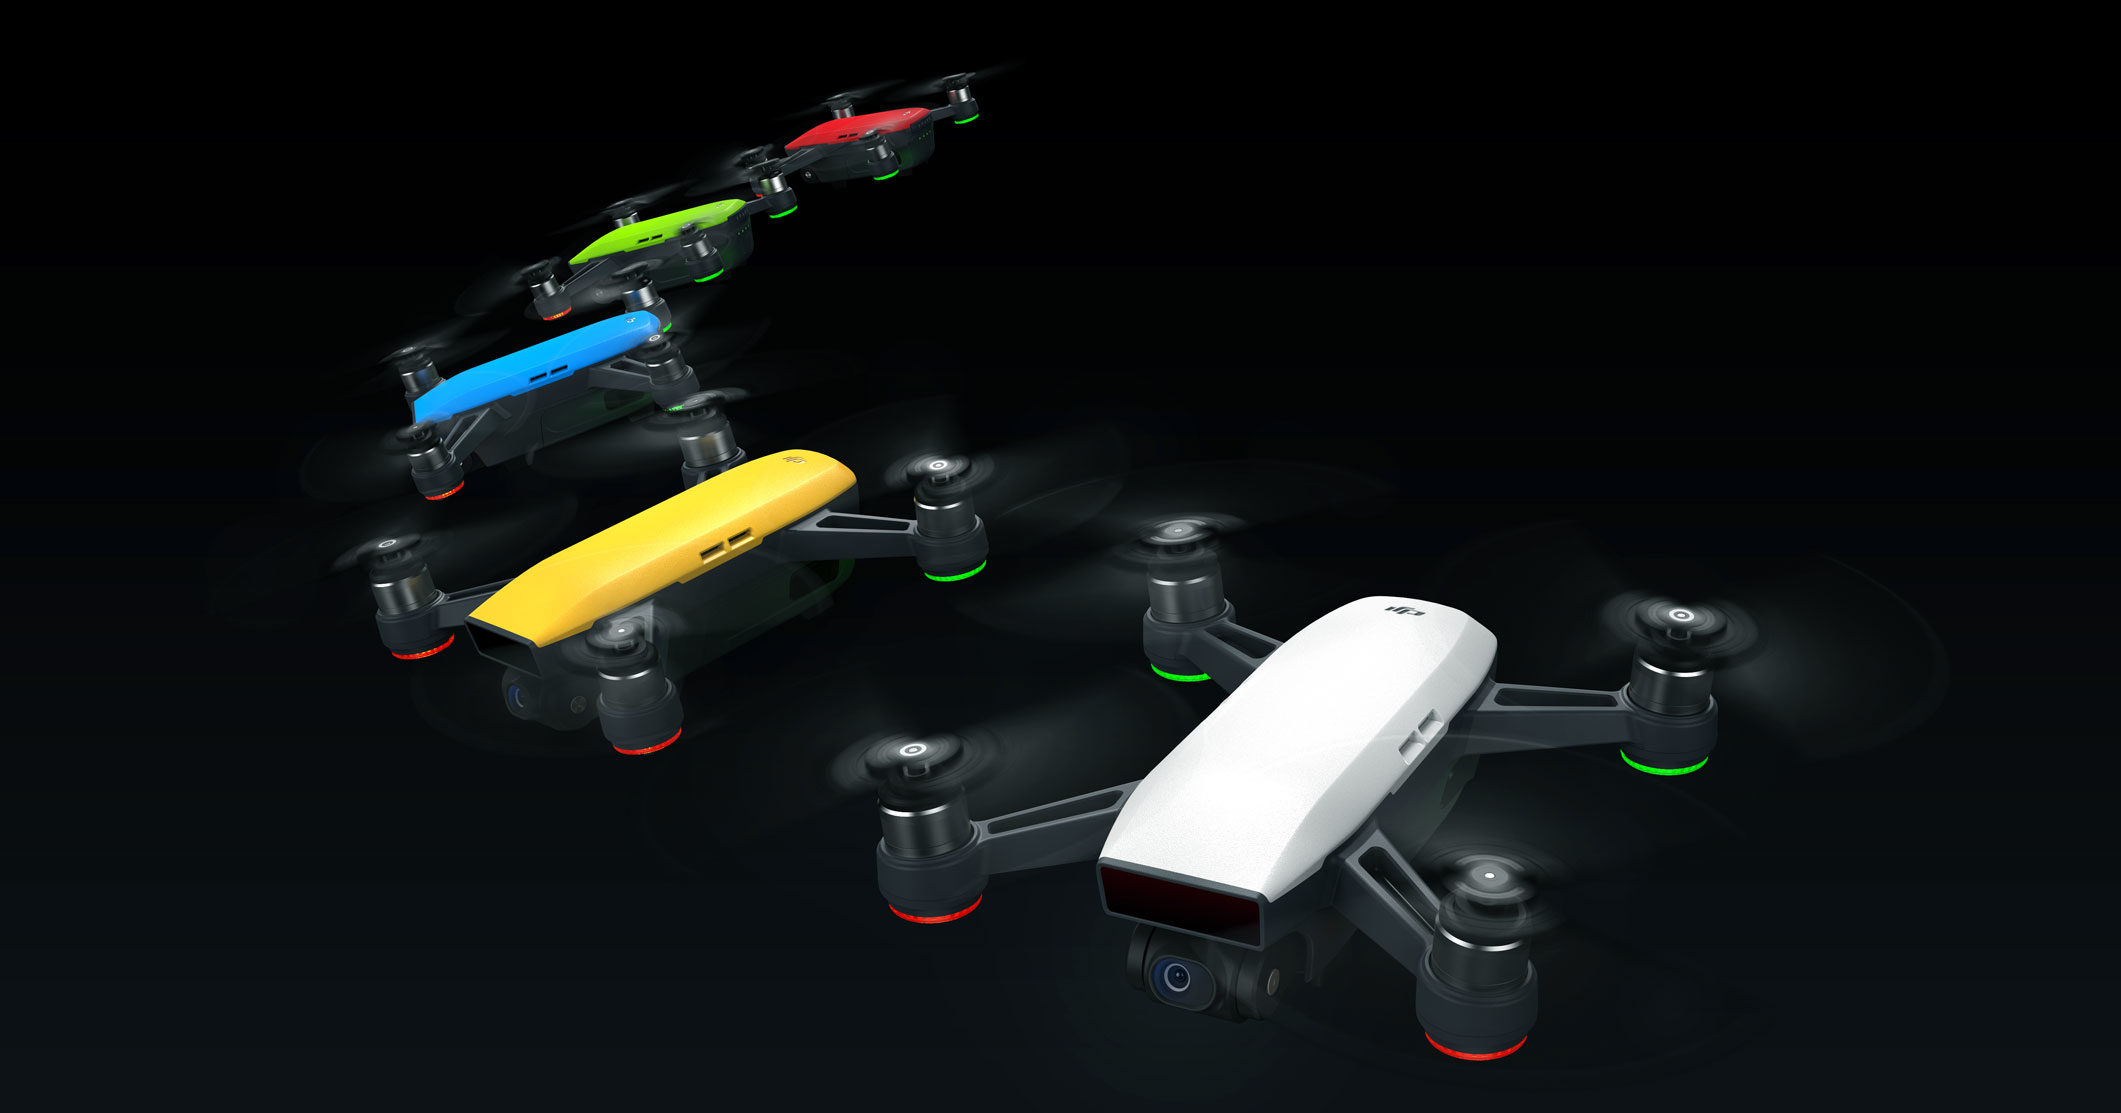 Free download DJI Spark Price Specs Release Date WIRED[2121x1113